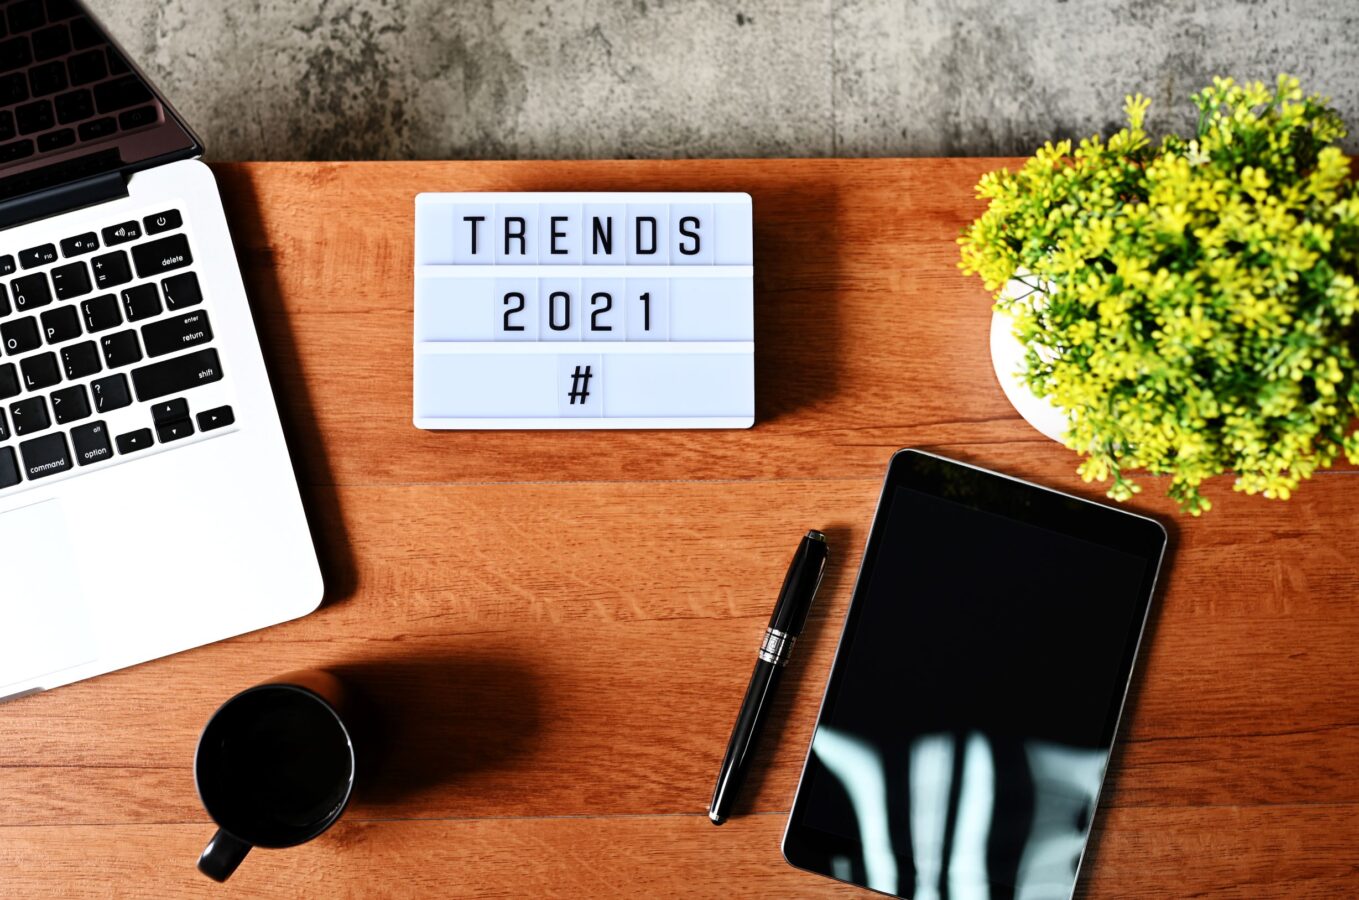 A board on the desk contains the words Customer Experience Trends in 2021.